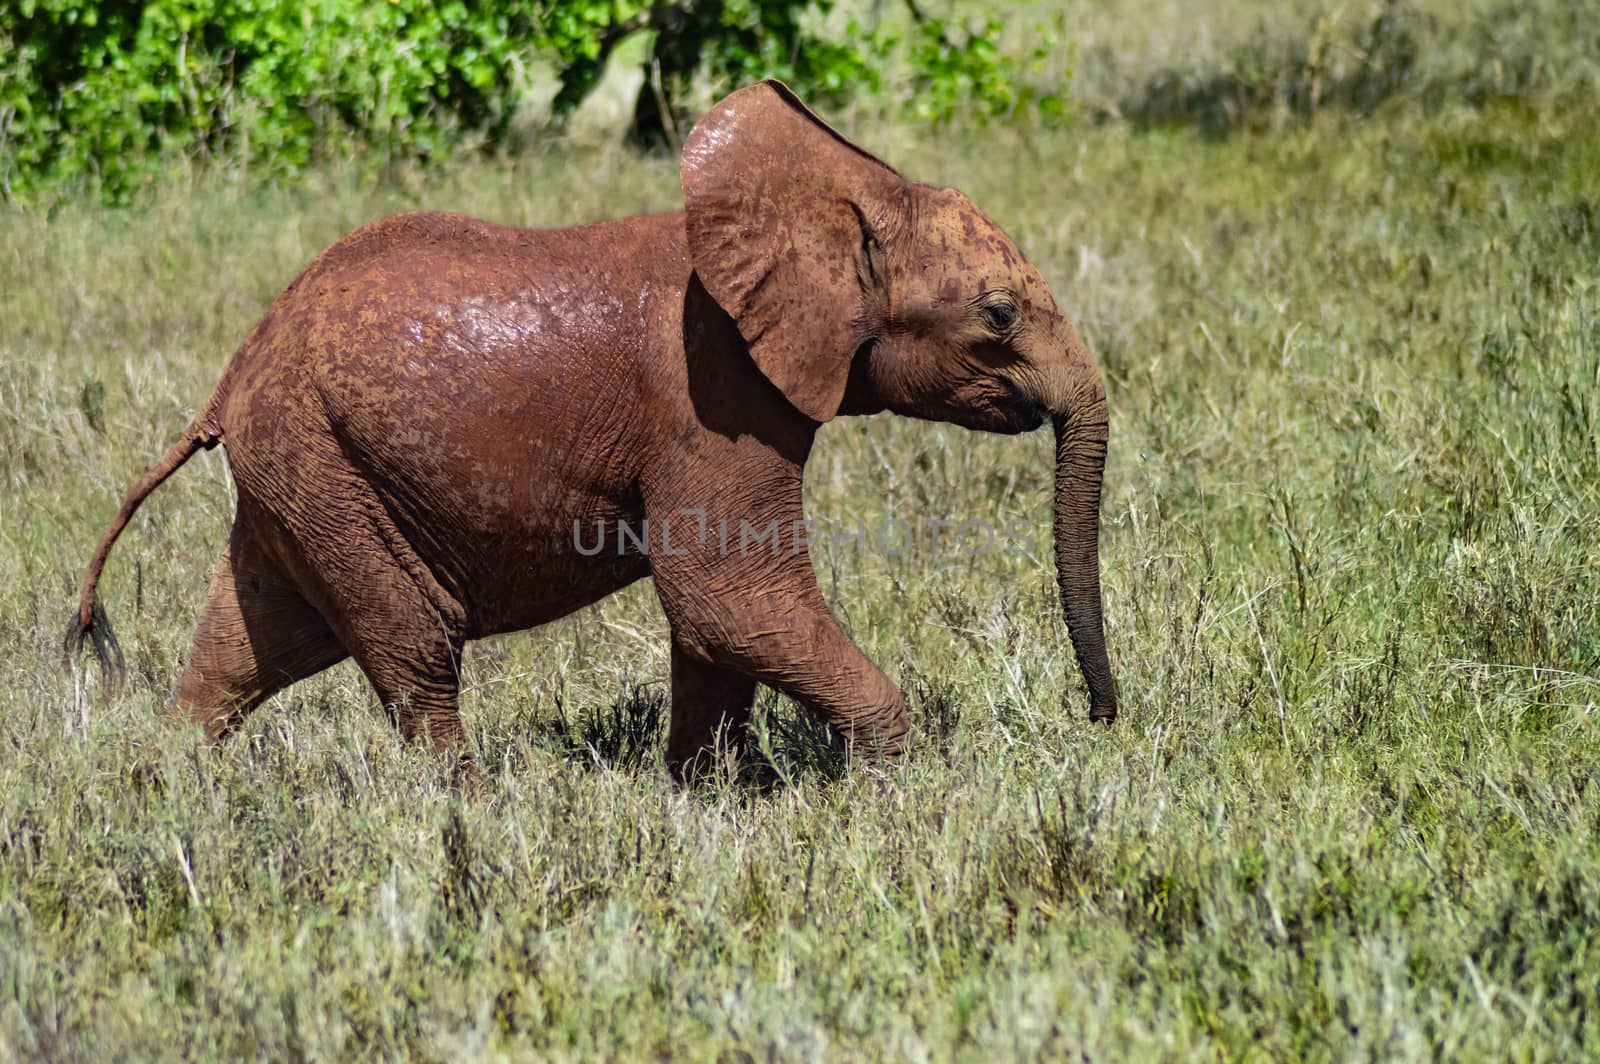 Small elephant strolling through by Philou1000